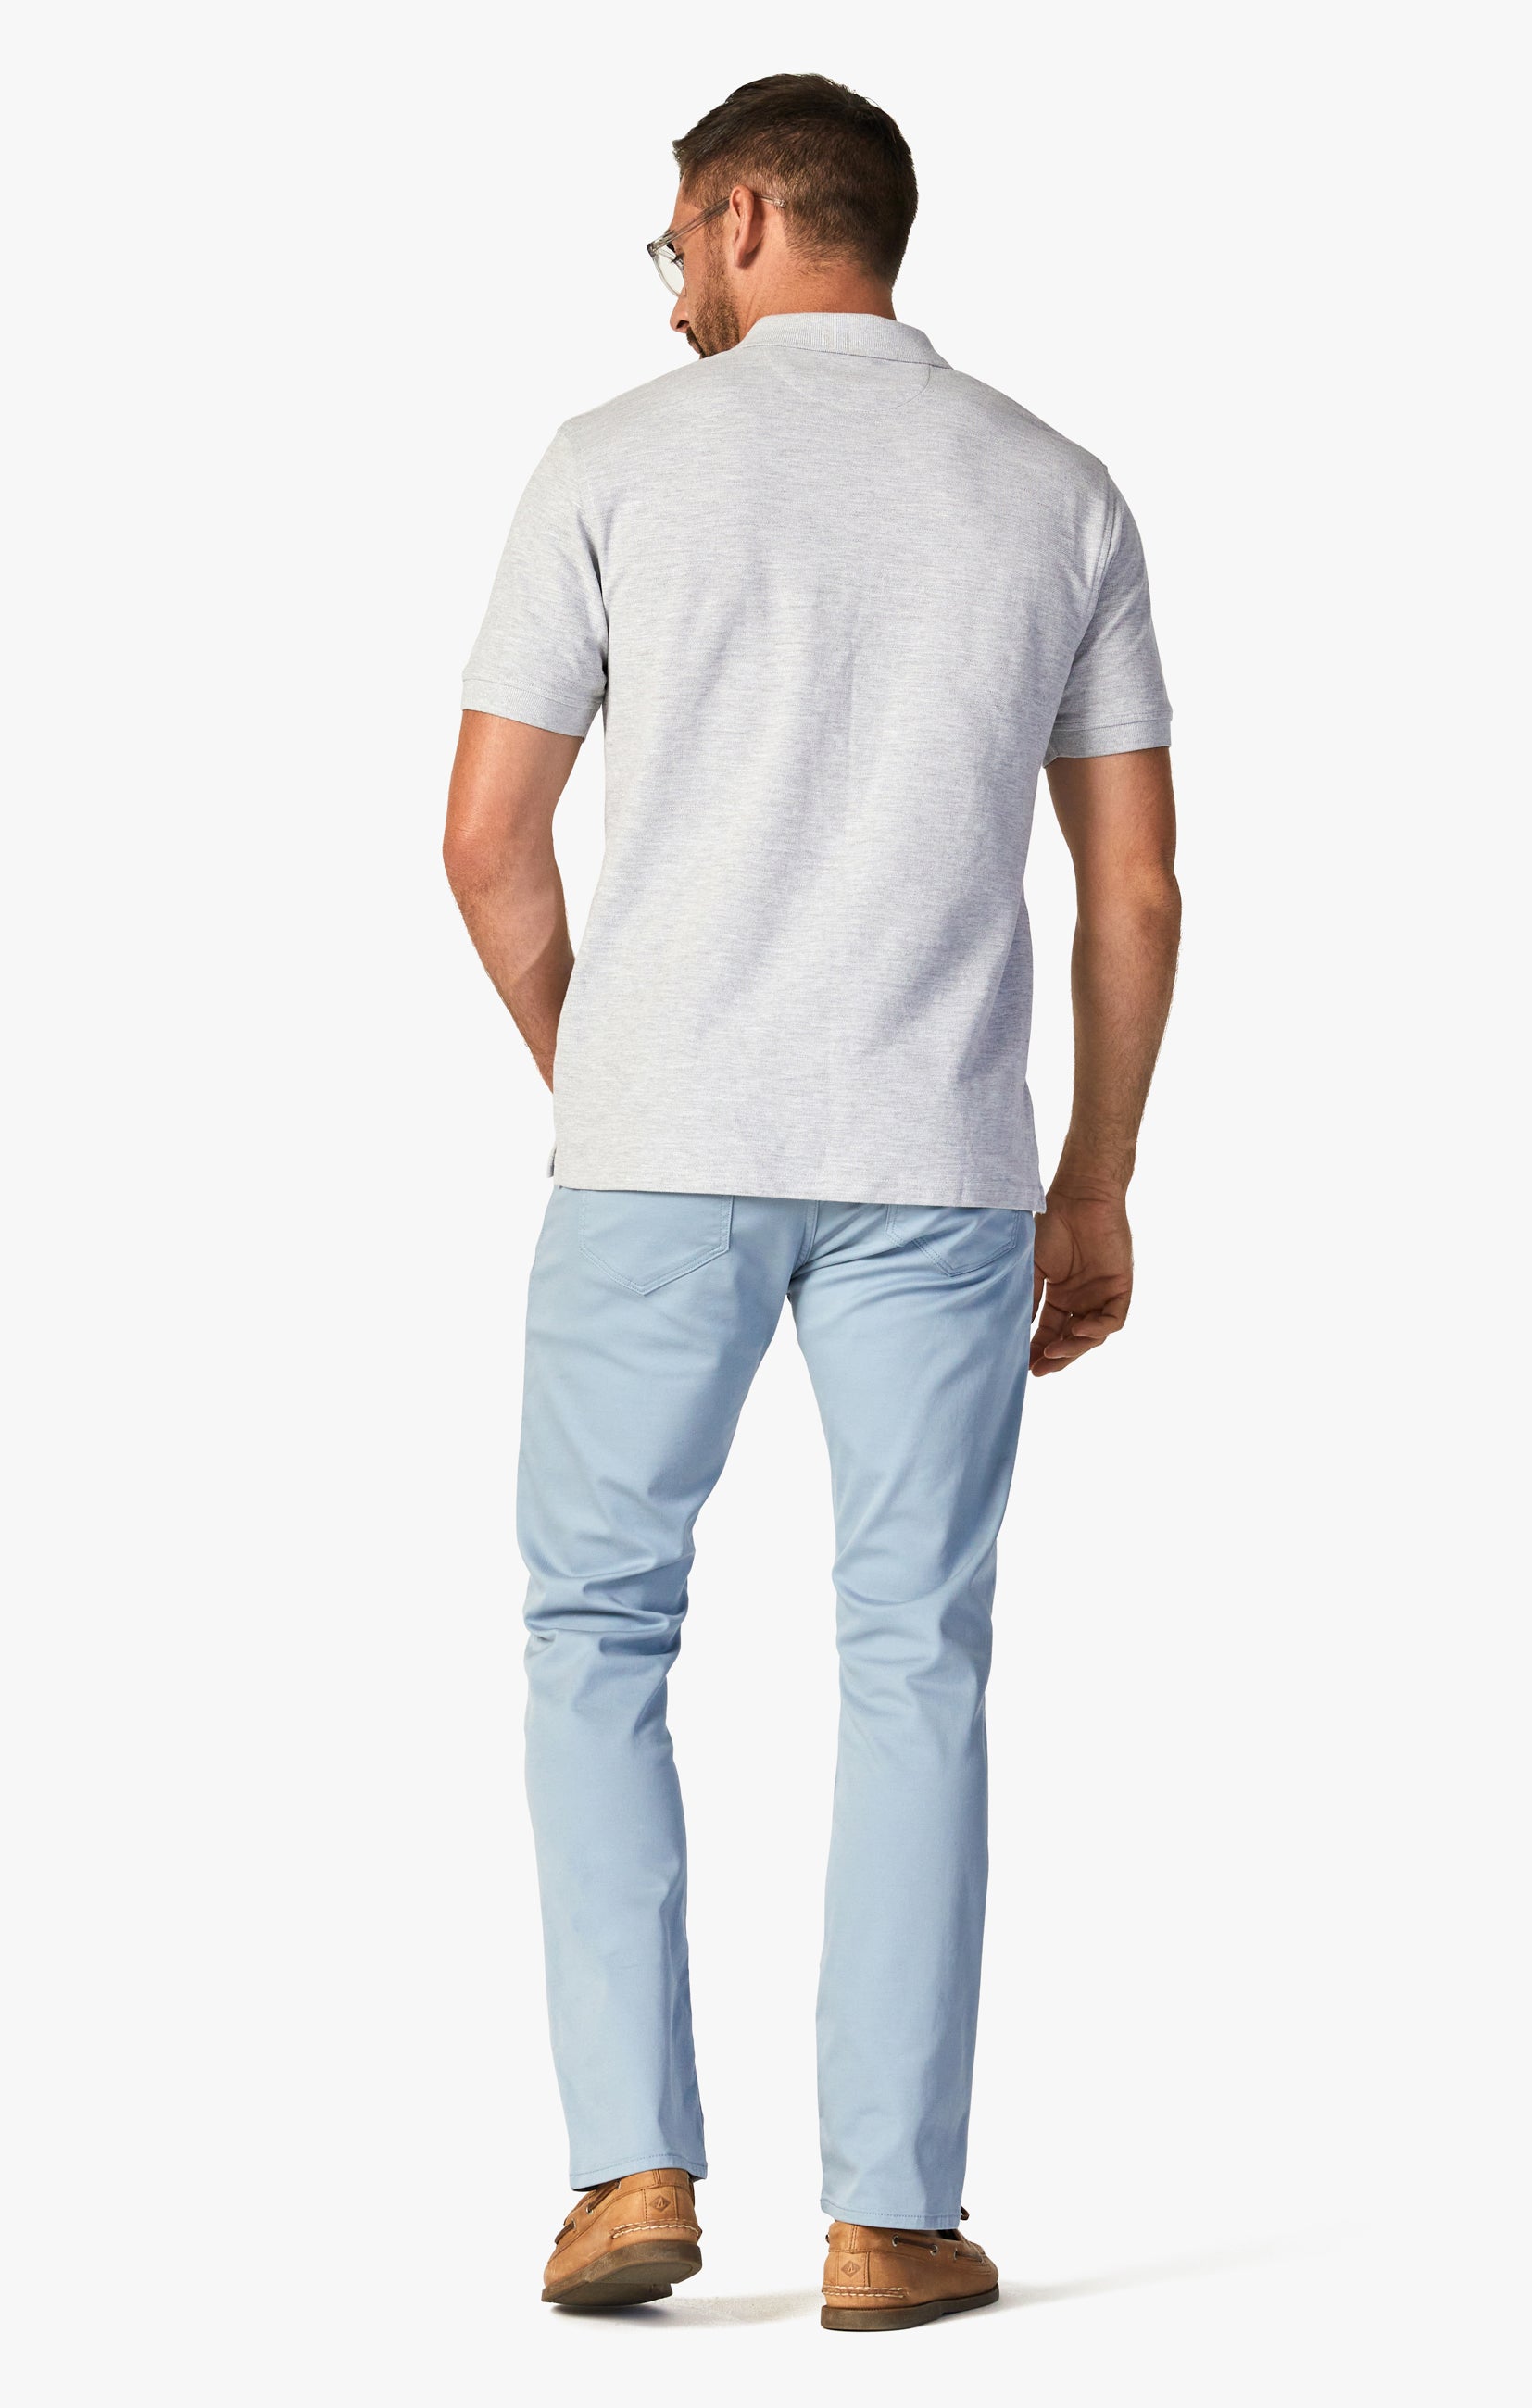 Charisma Relaxed Straight Pants In French Blue Summer Coolmax